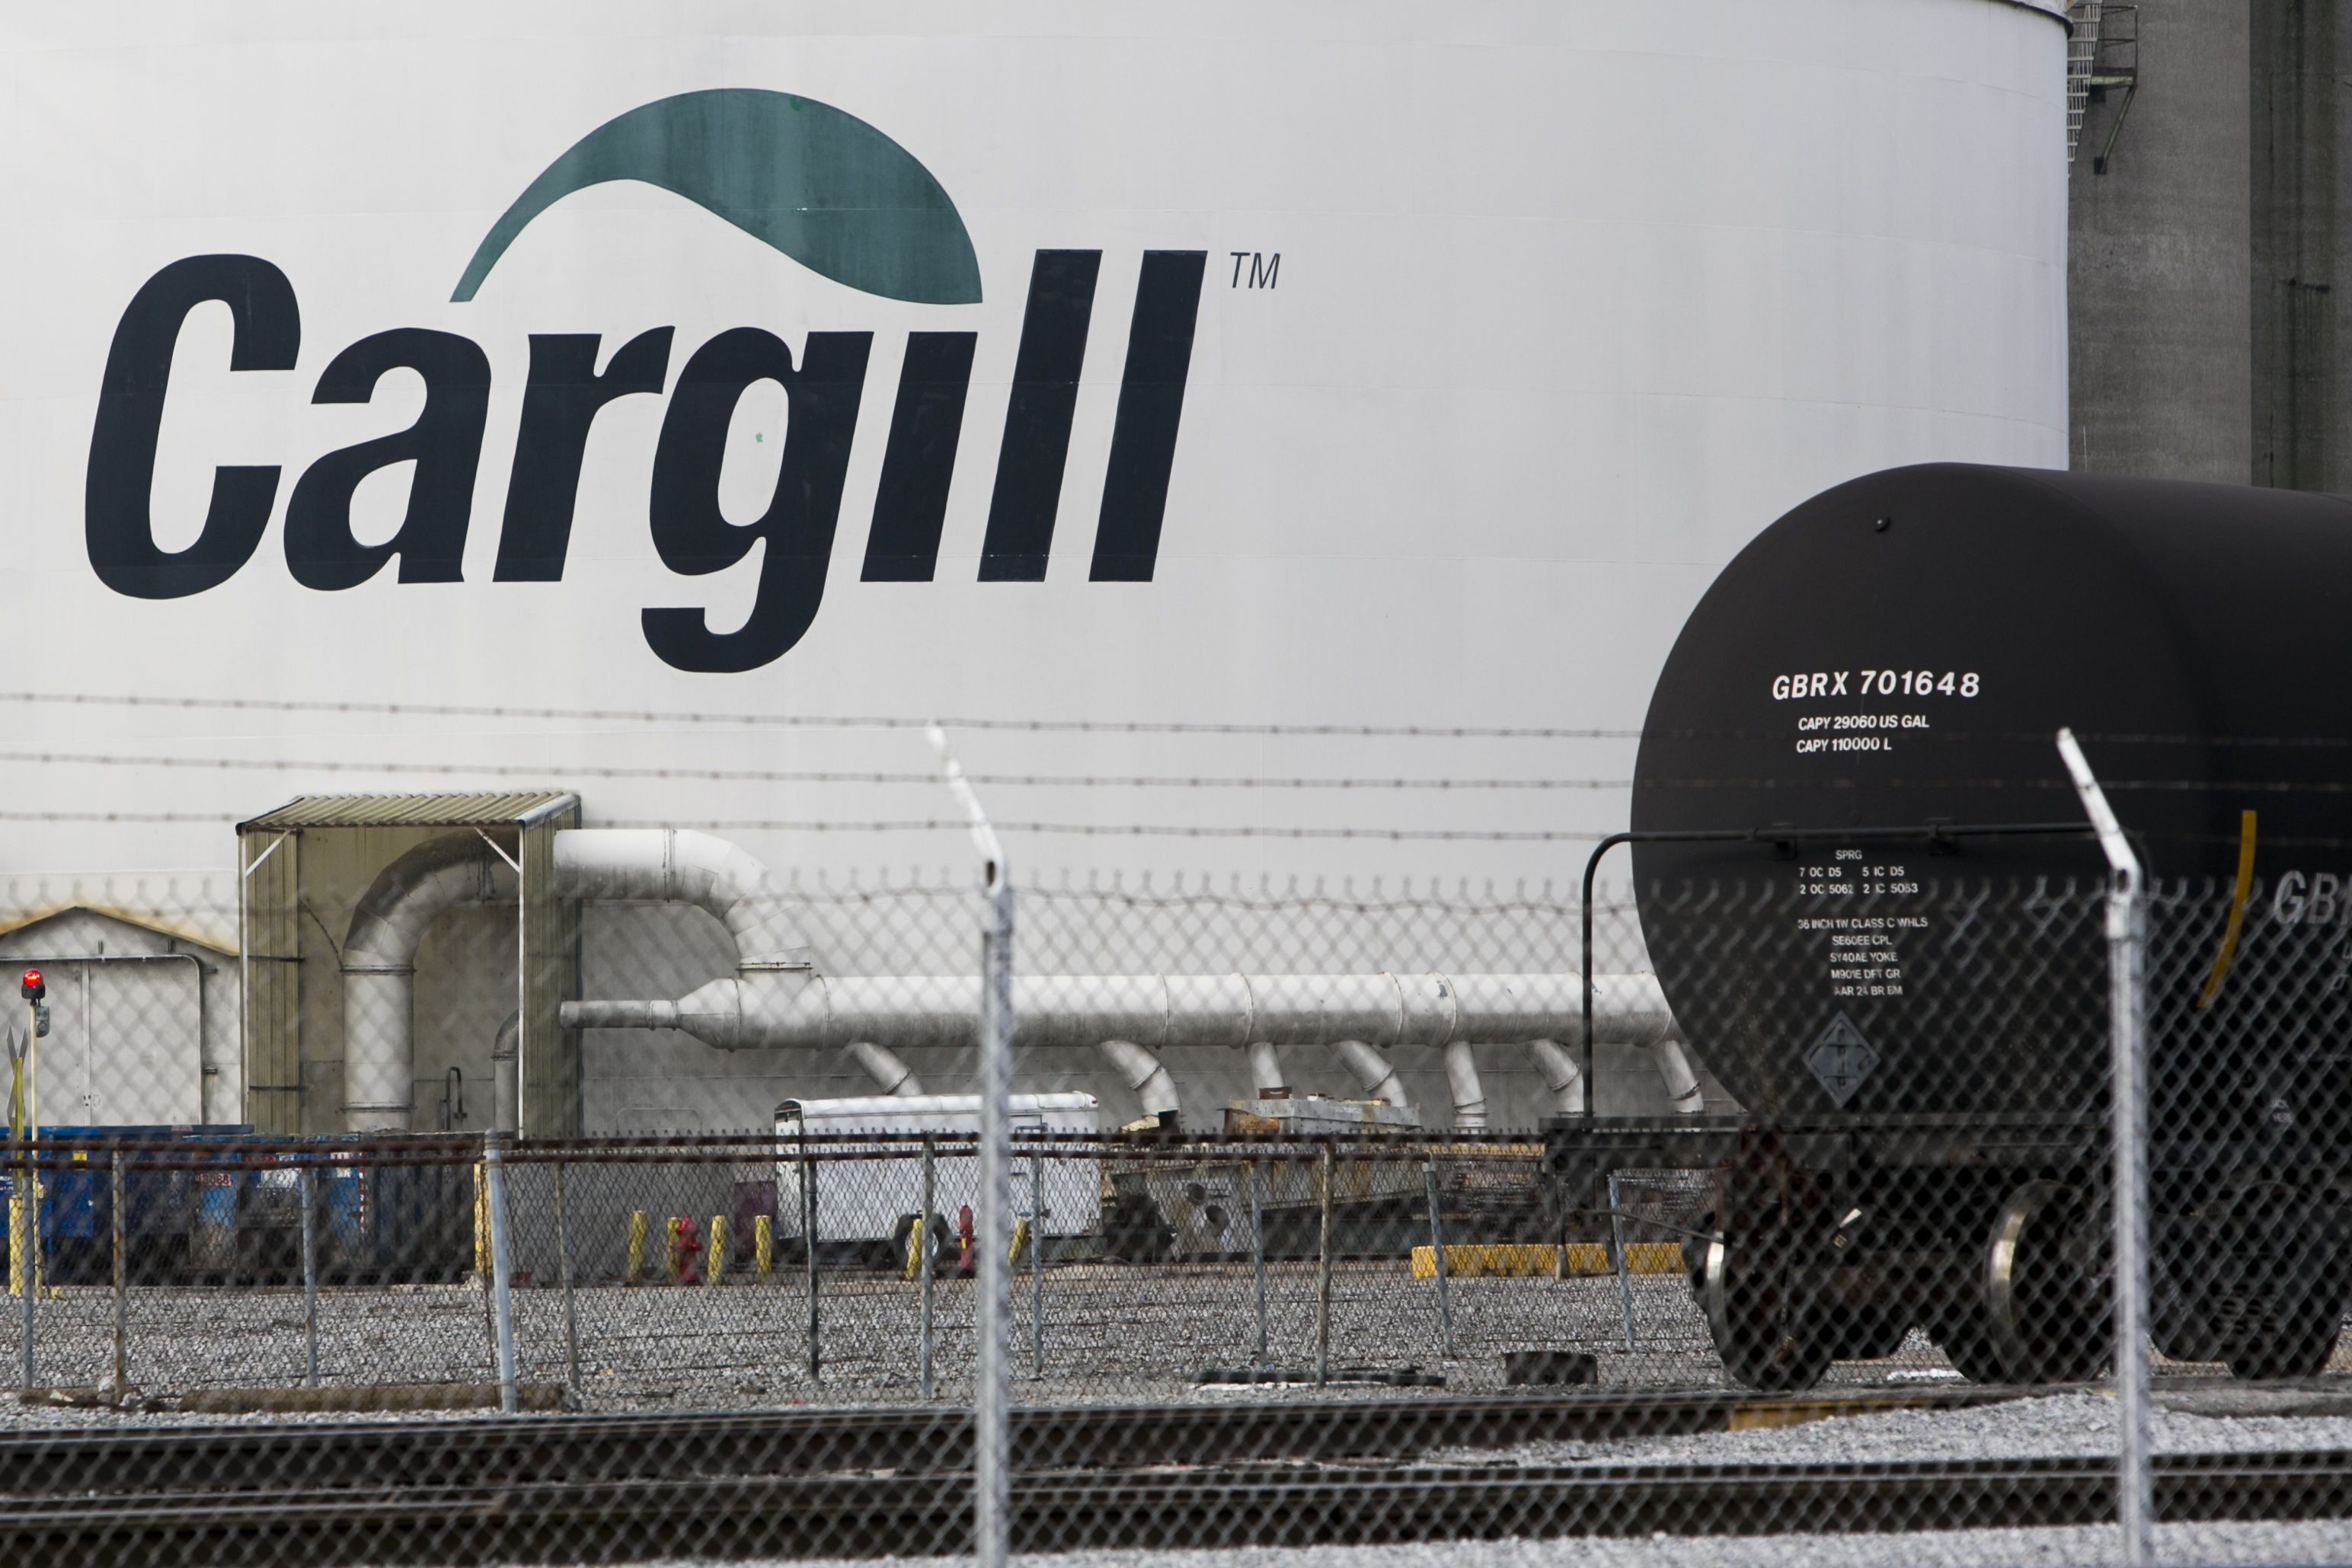 Chris Langholz, president of Cargill Poultry said: “The venture will facilitate greater opportunities to innovate and deliver new and exciting poultry products for consumers.” Photo: ddp/USA/Rex/Shutterstock